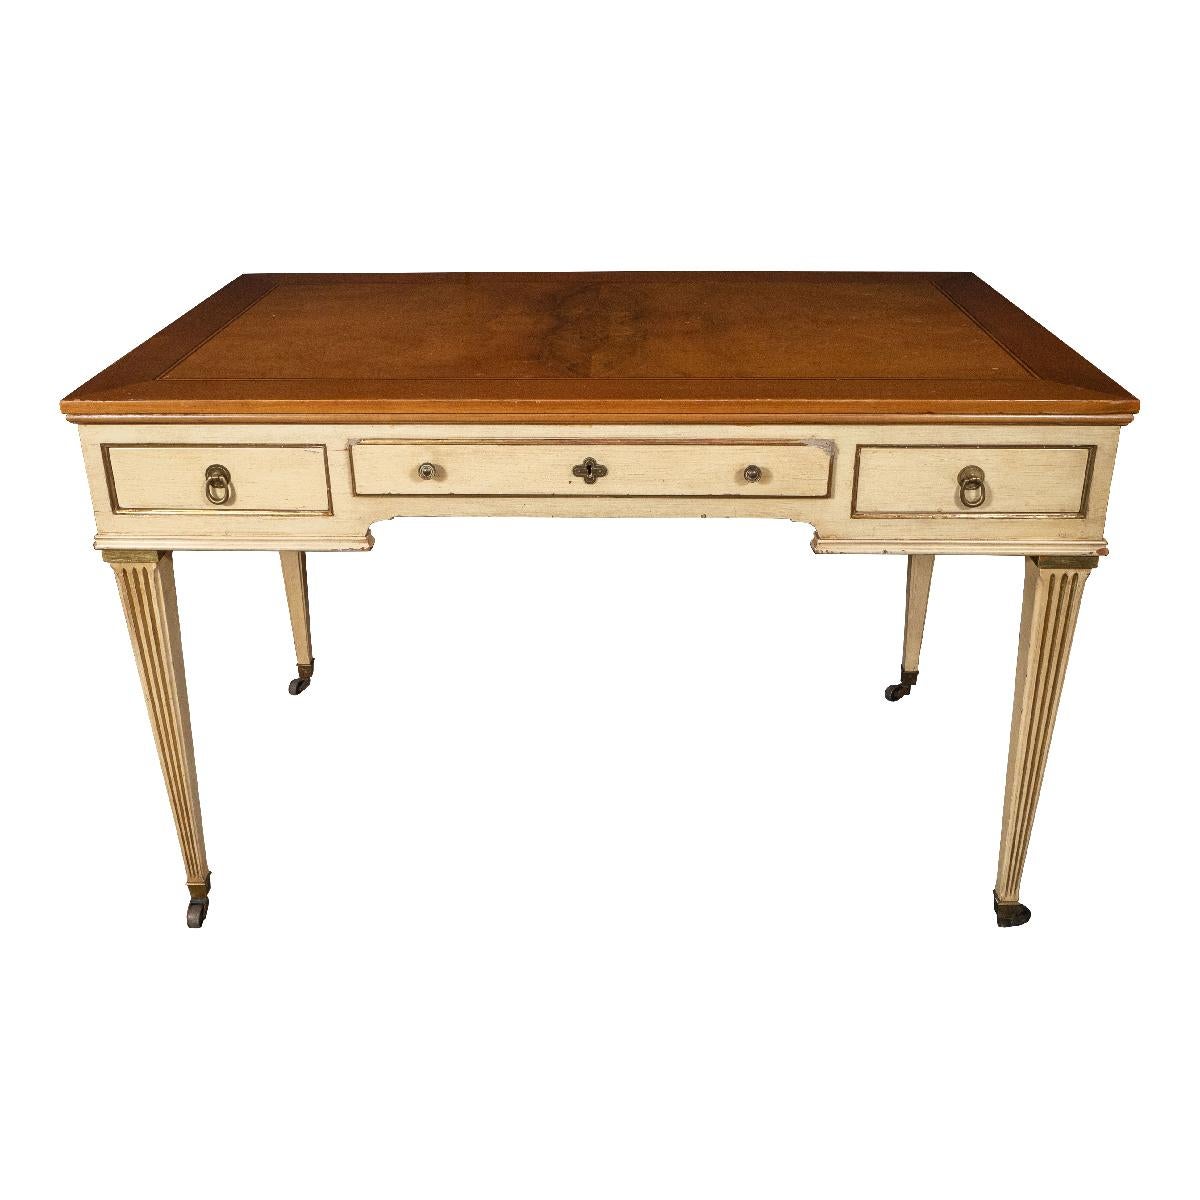 Carved, painted and giltwood Hollywood Regency style desk on brass castors with walnut burl top by Berkey Furniture Co. for John Widdicomb. Signed.